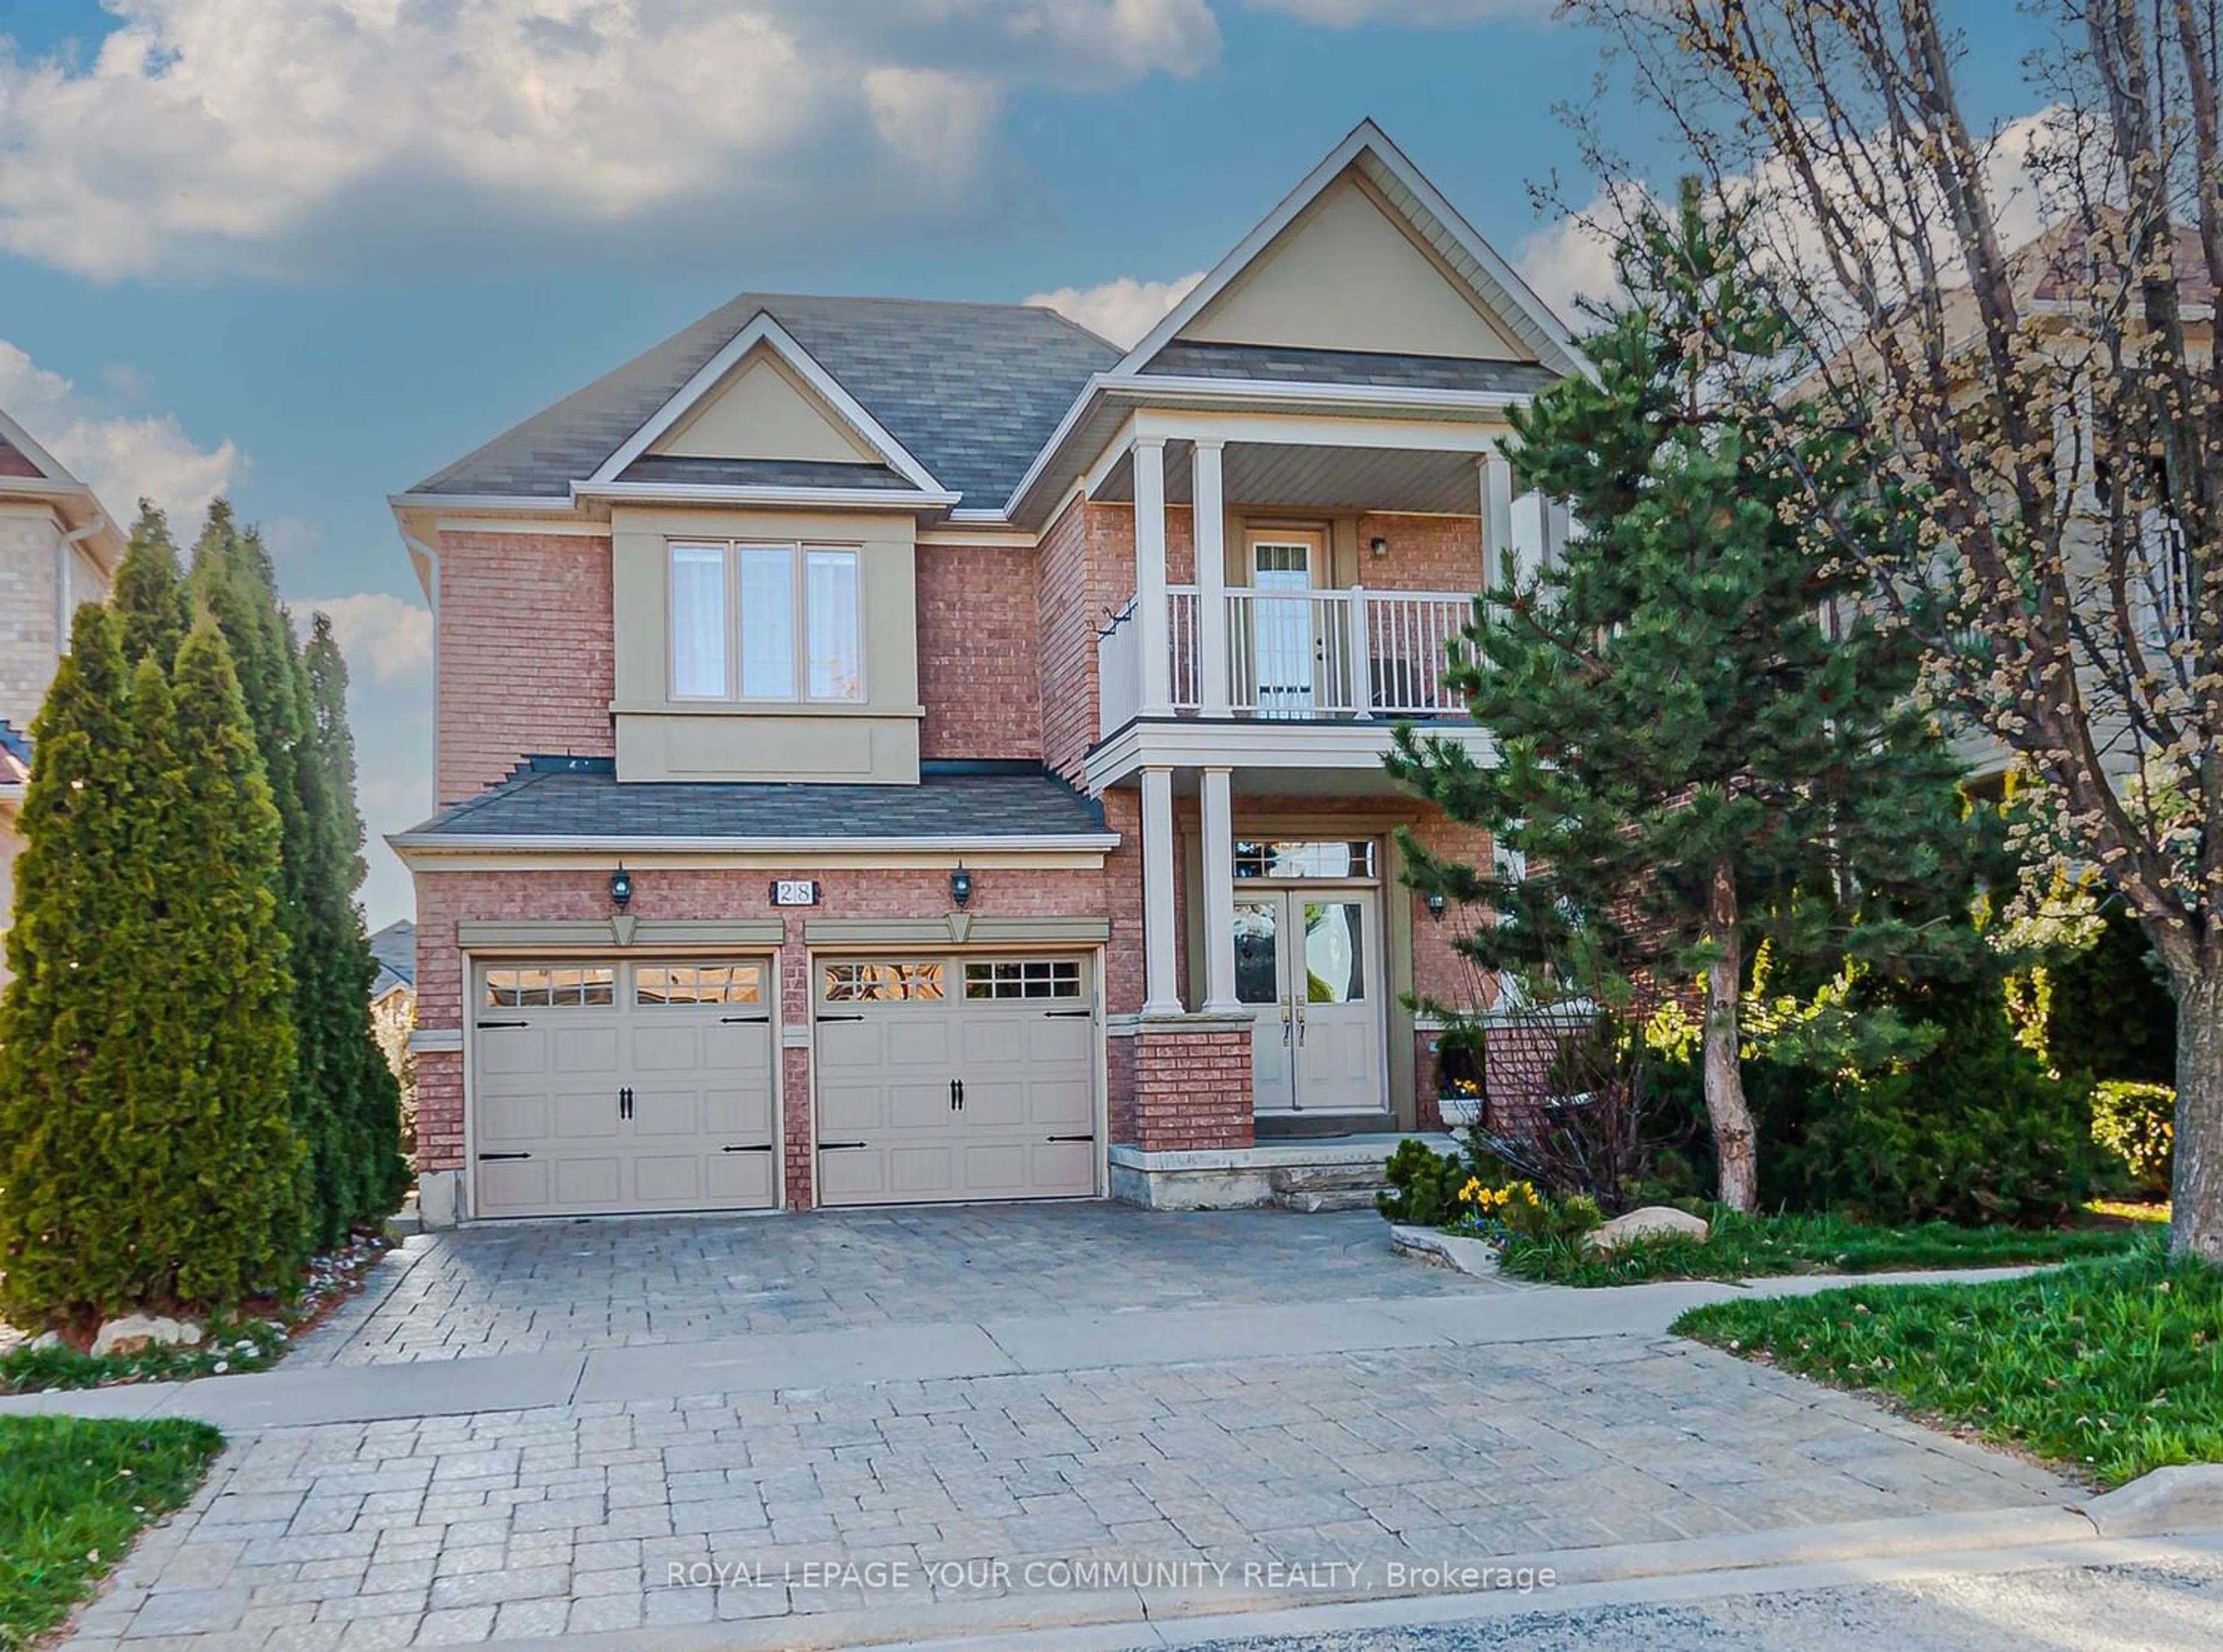 Home with brick exterior material for 28 Ferretti St, Vaughan Ontario L6A 0H6